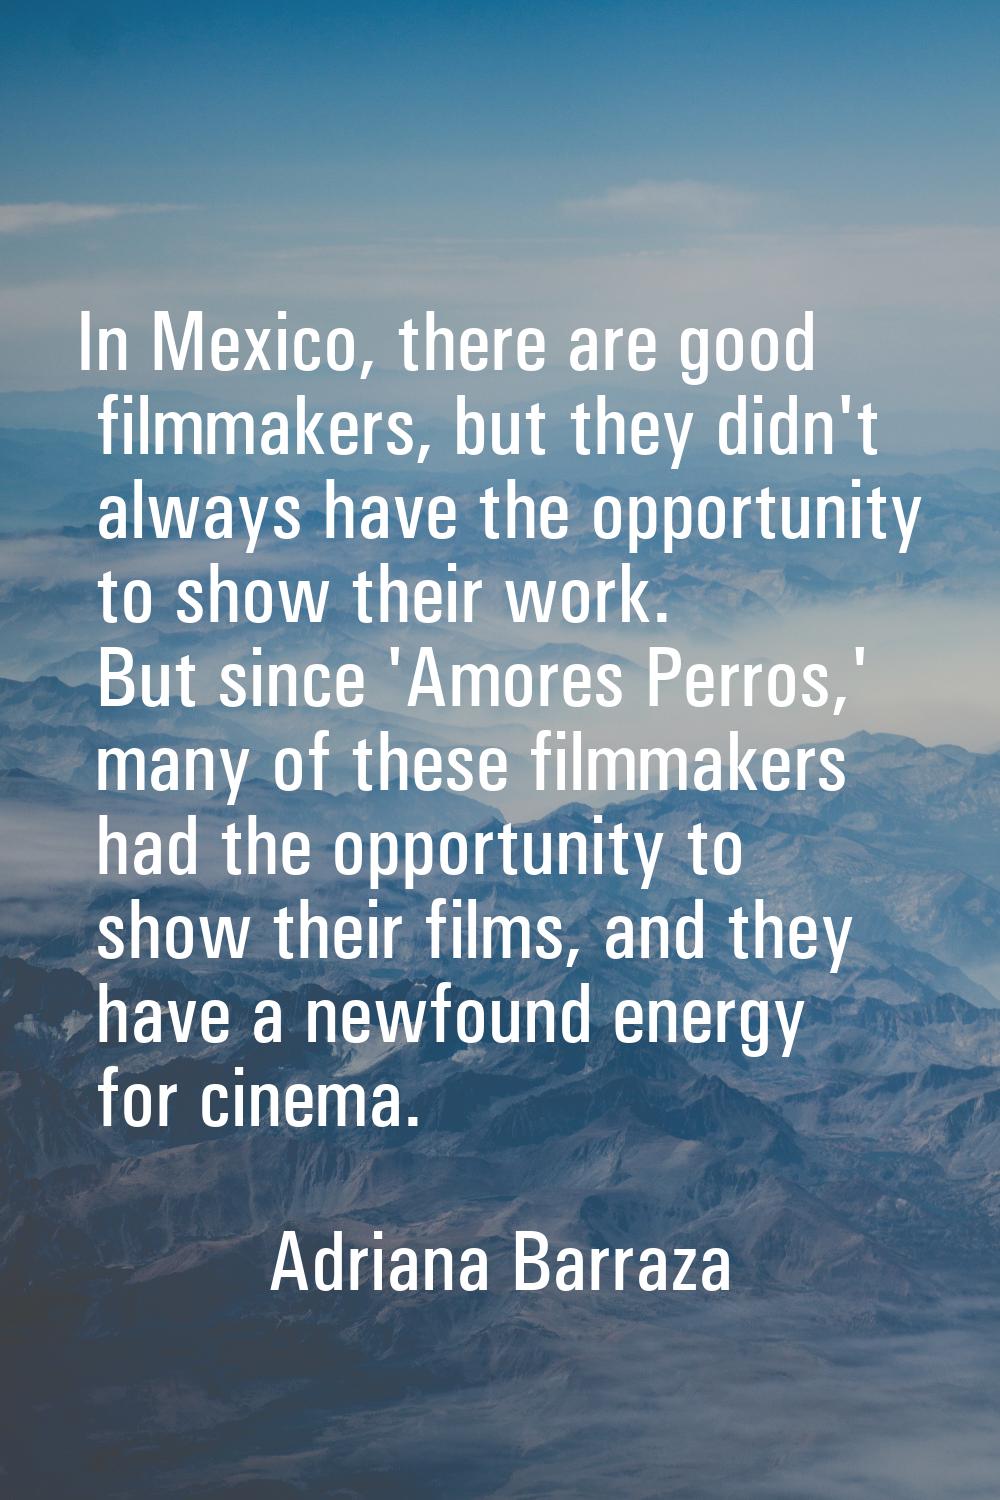 In Mexico, there are good filmmakers, but they didn't always have the opportunity to show their wor